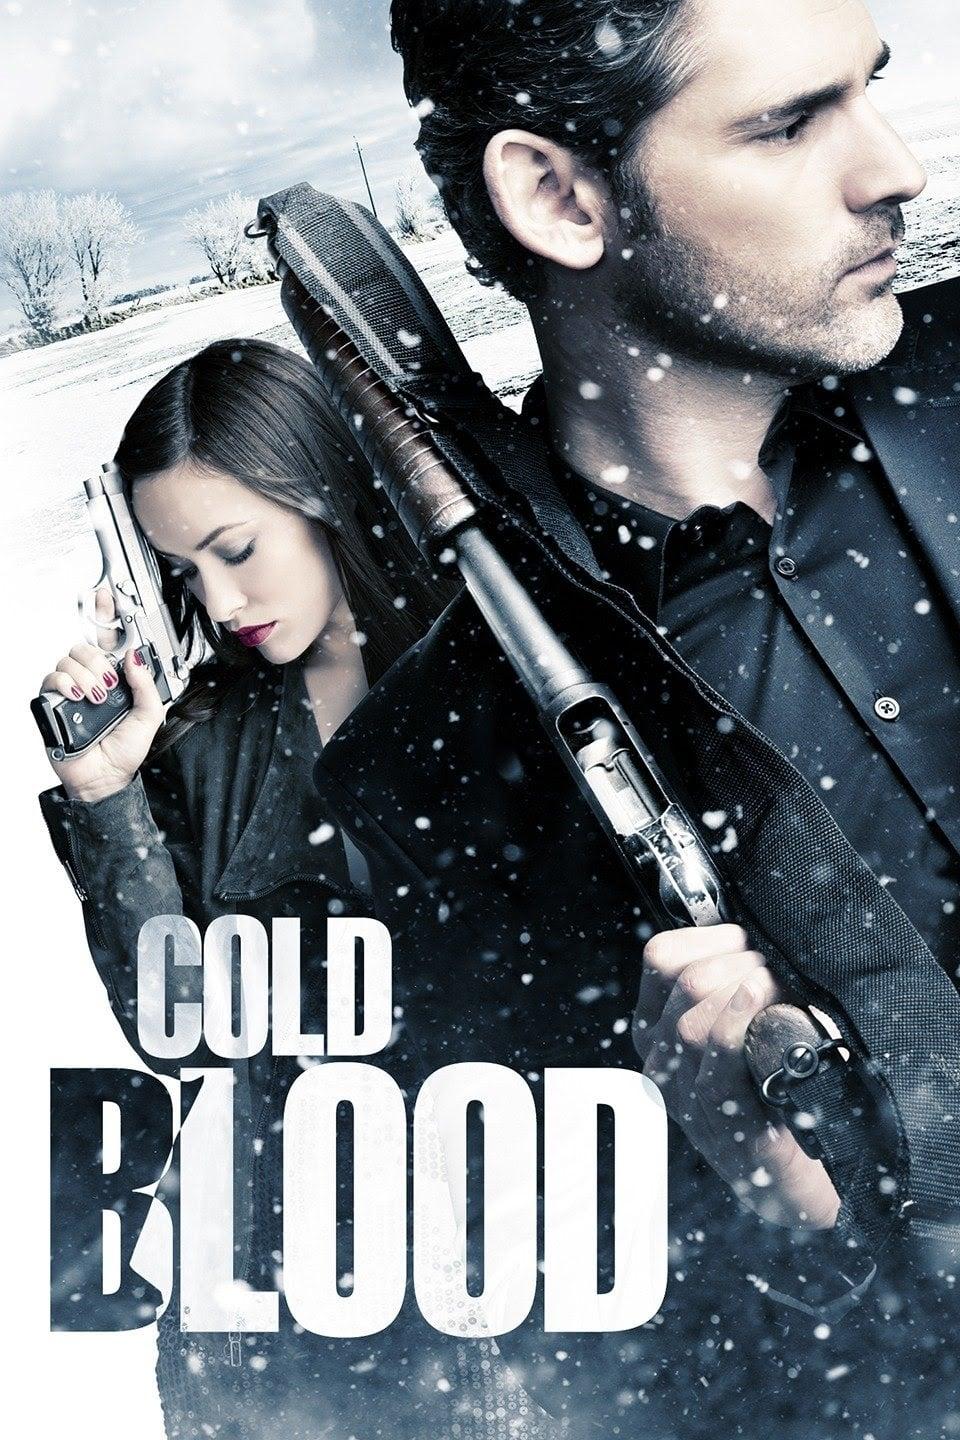 Cold Blood poster